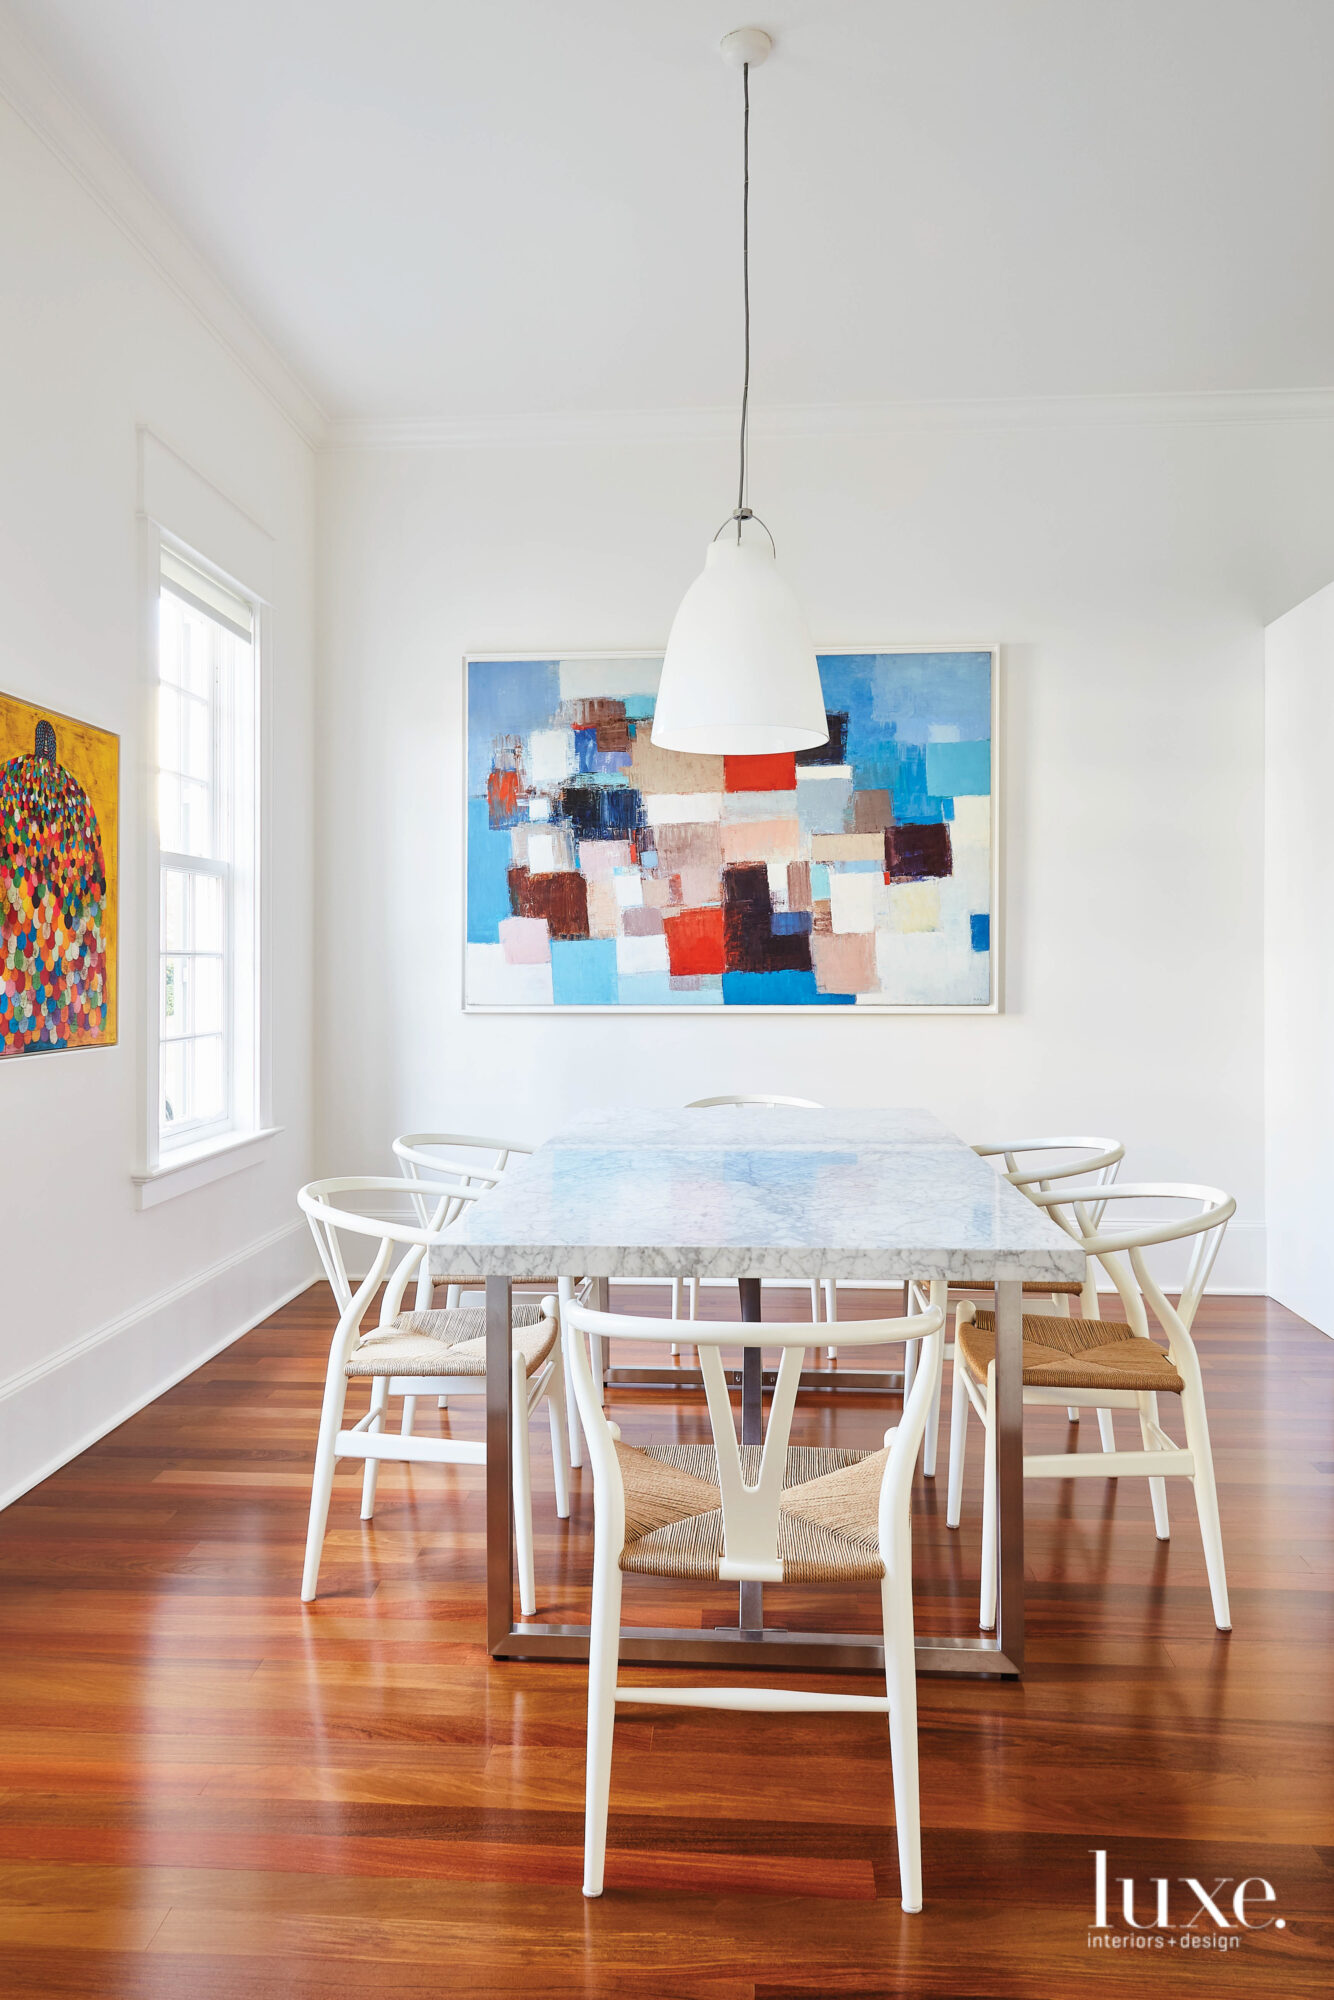 Dining room with marble and stainless steel table and colorful abstract art.